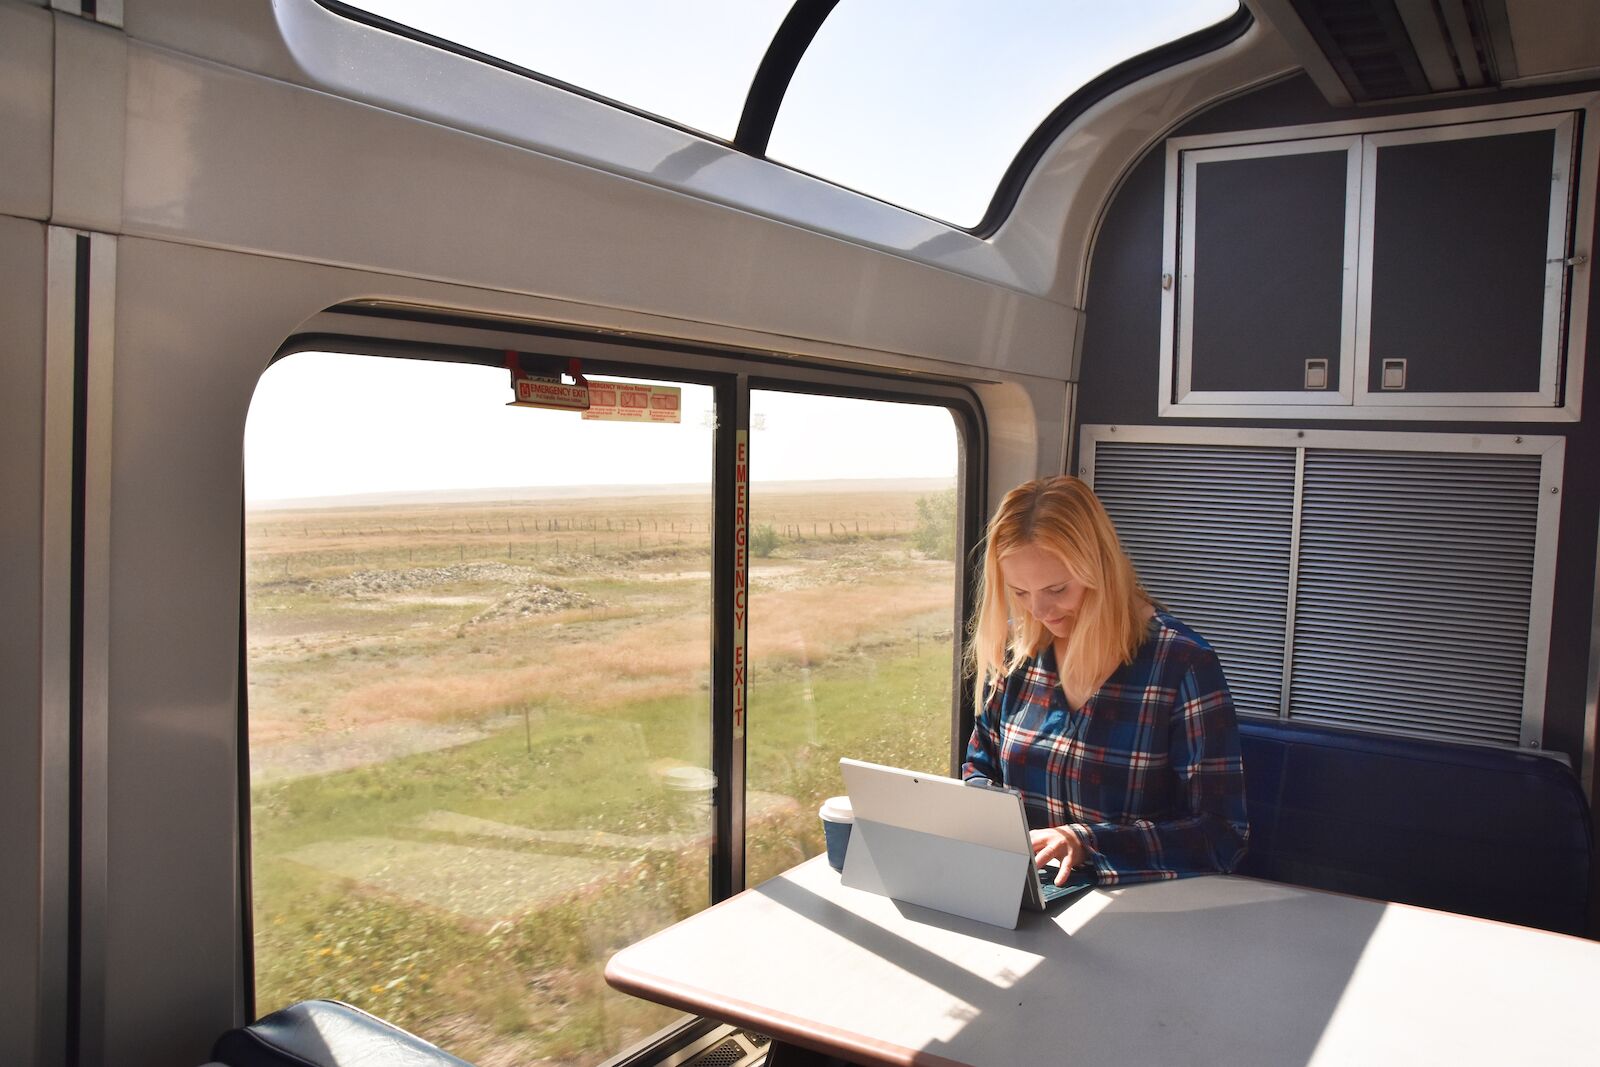 Woman using a tablet on a train using Amtrak's WiFi